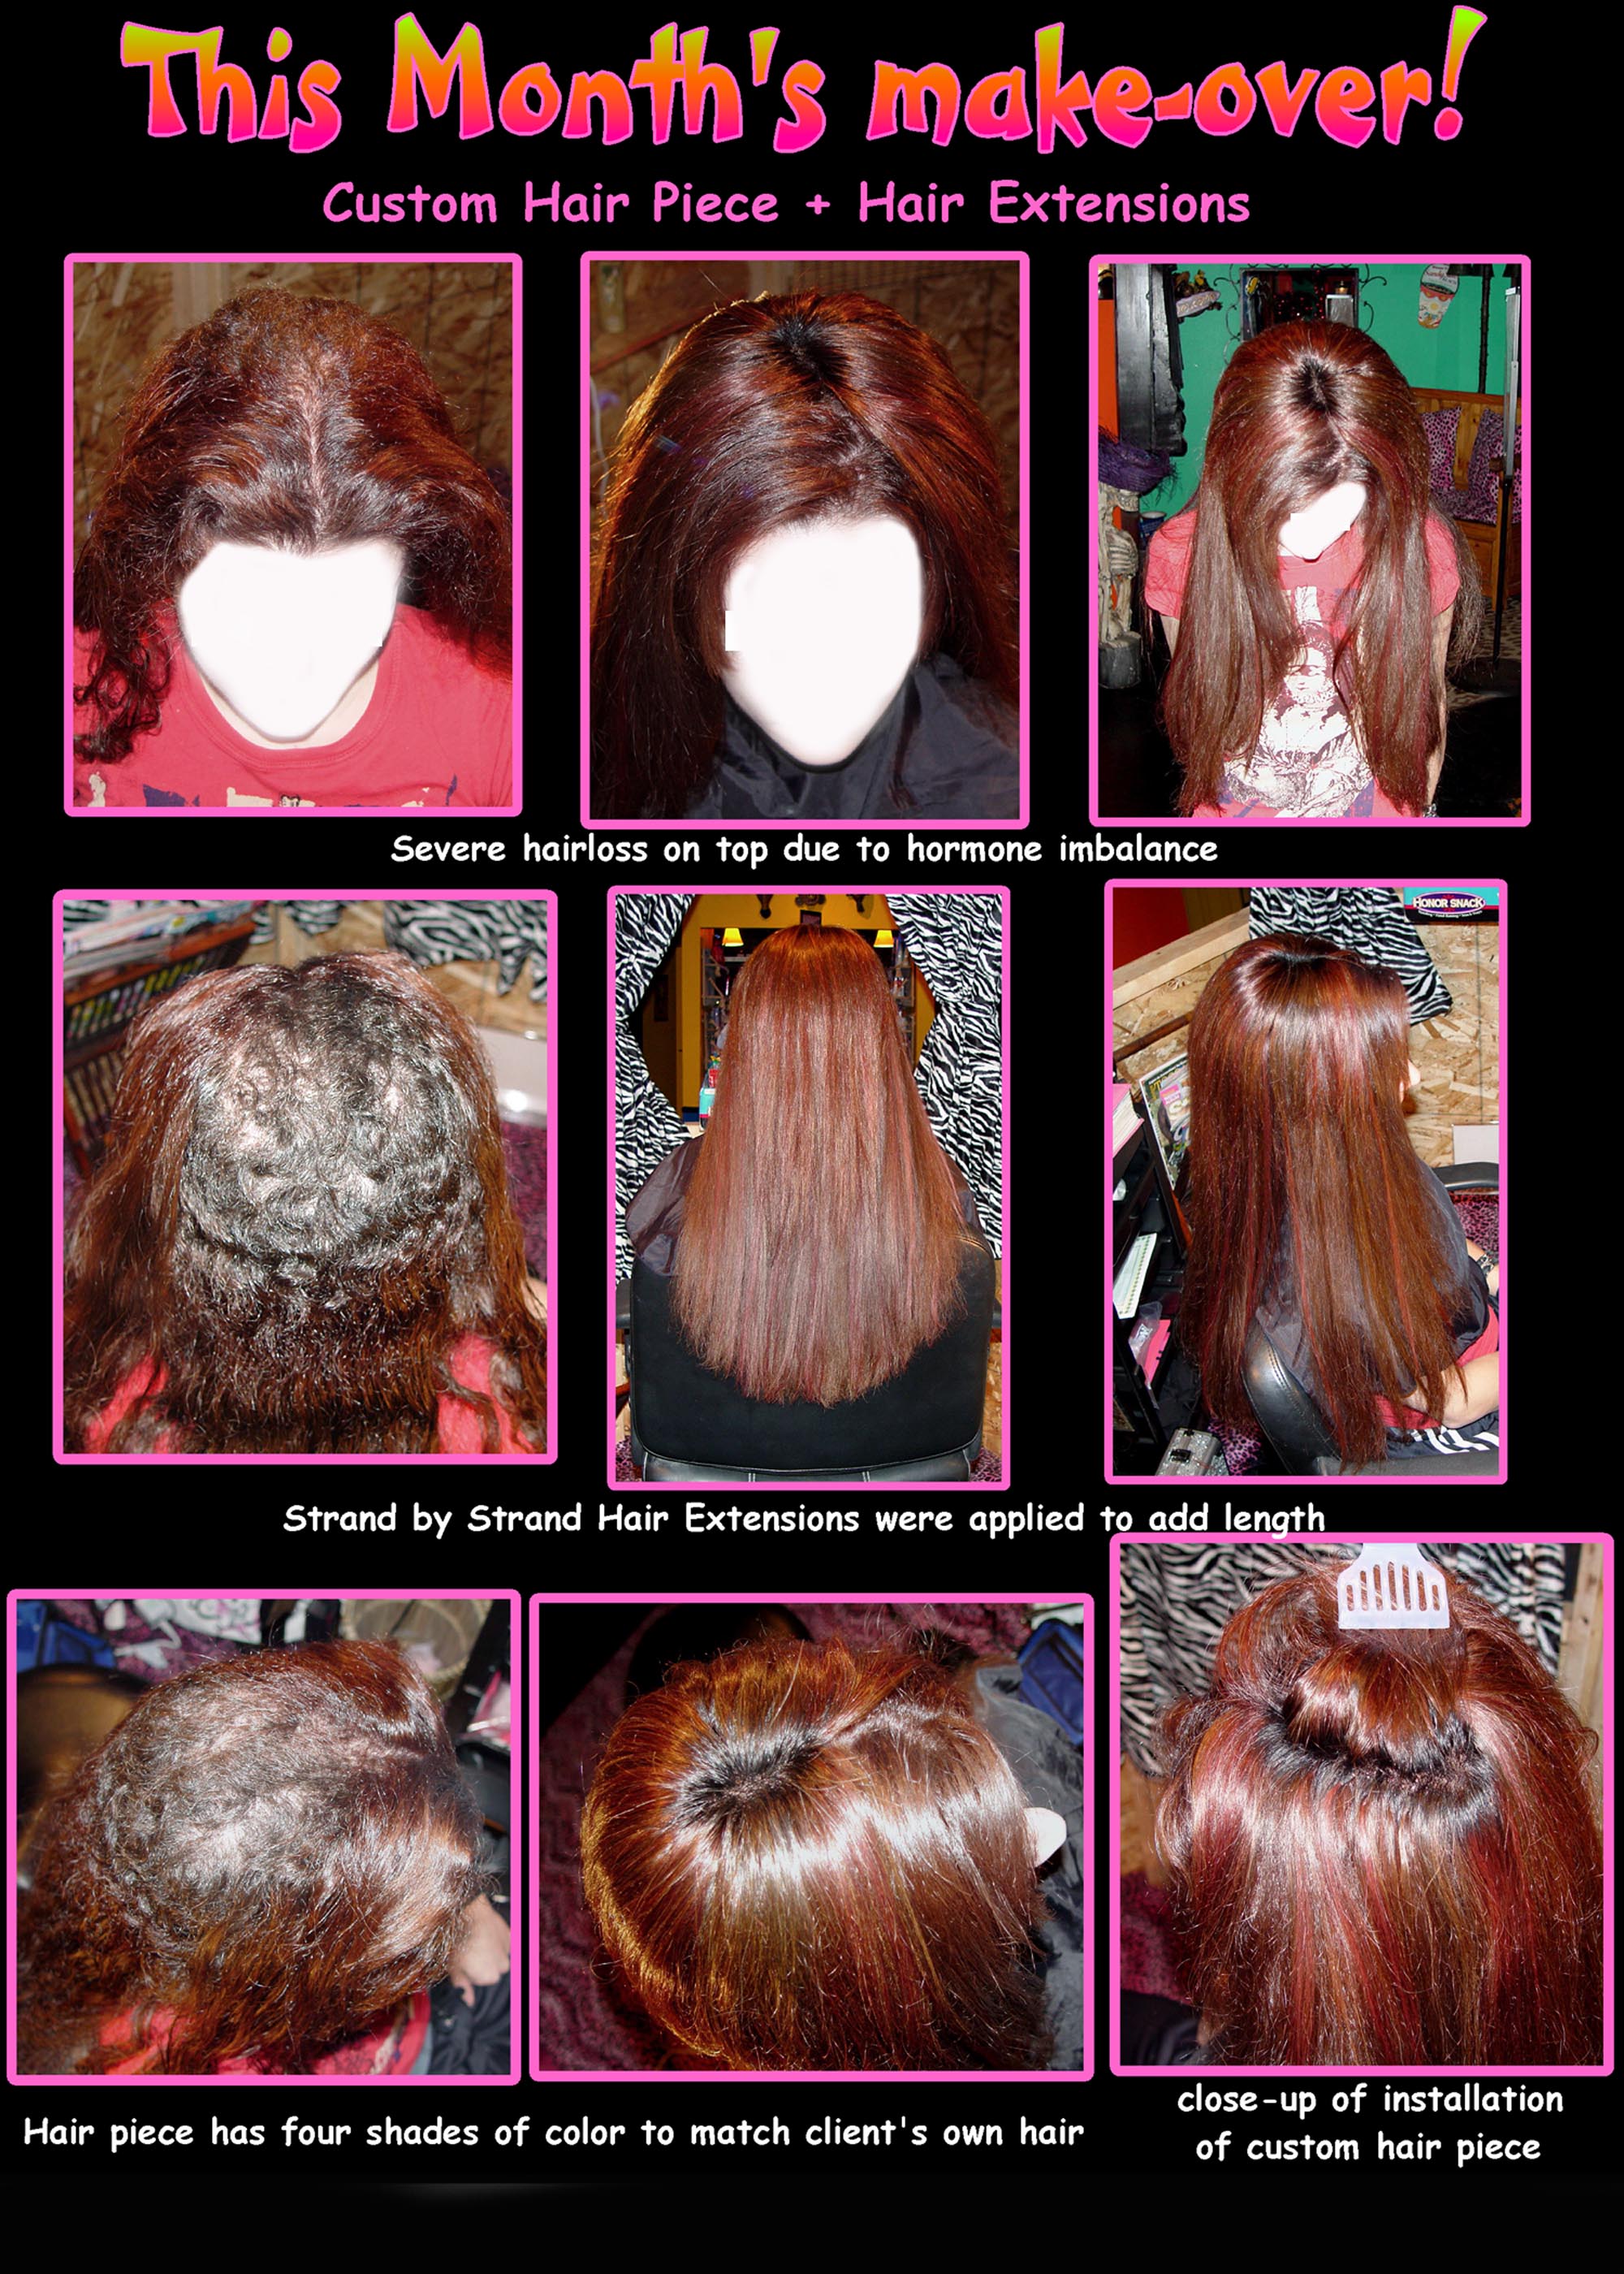 This client suffers from severe hairloss on the top area due to a hormone imbalance. The new customized mesh hair piece was a perfect choice for covering her problem area.